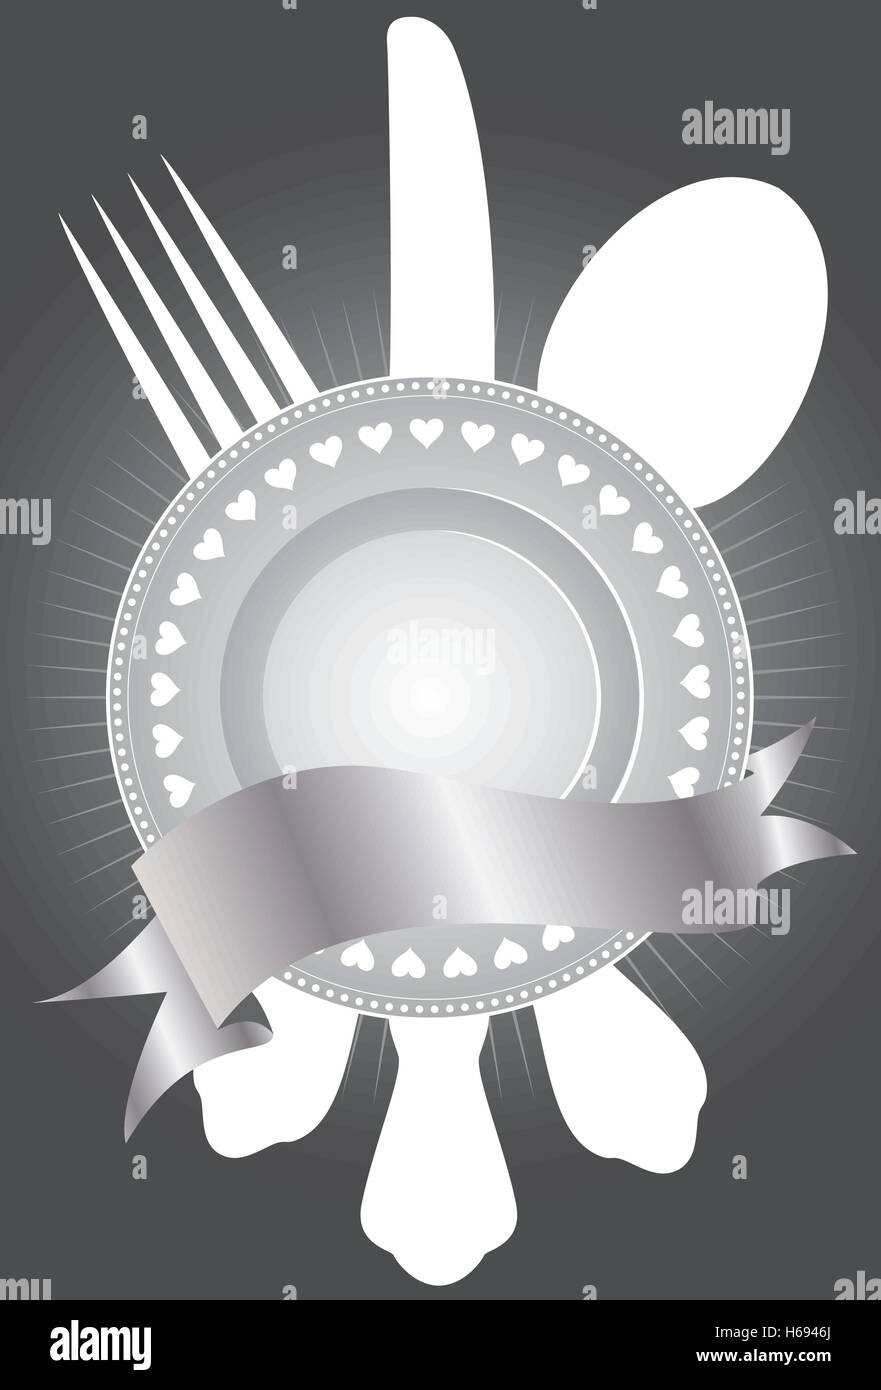 Classy, heart healthy plate  A dinner plate with white hearts and a fork, knife, and spoon. Stock Vector